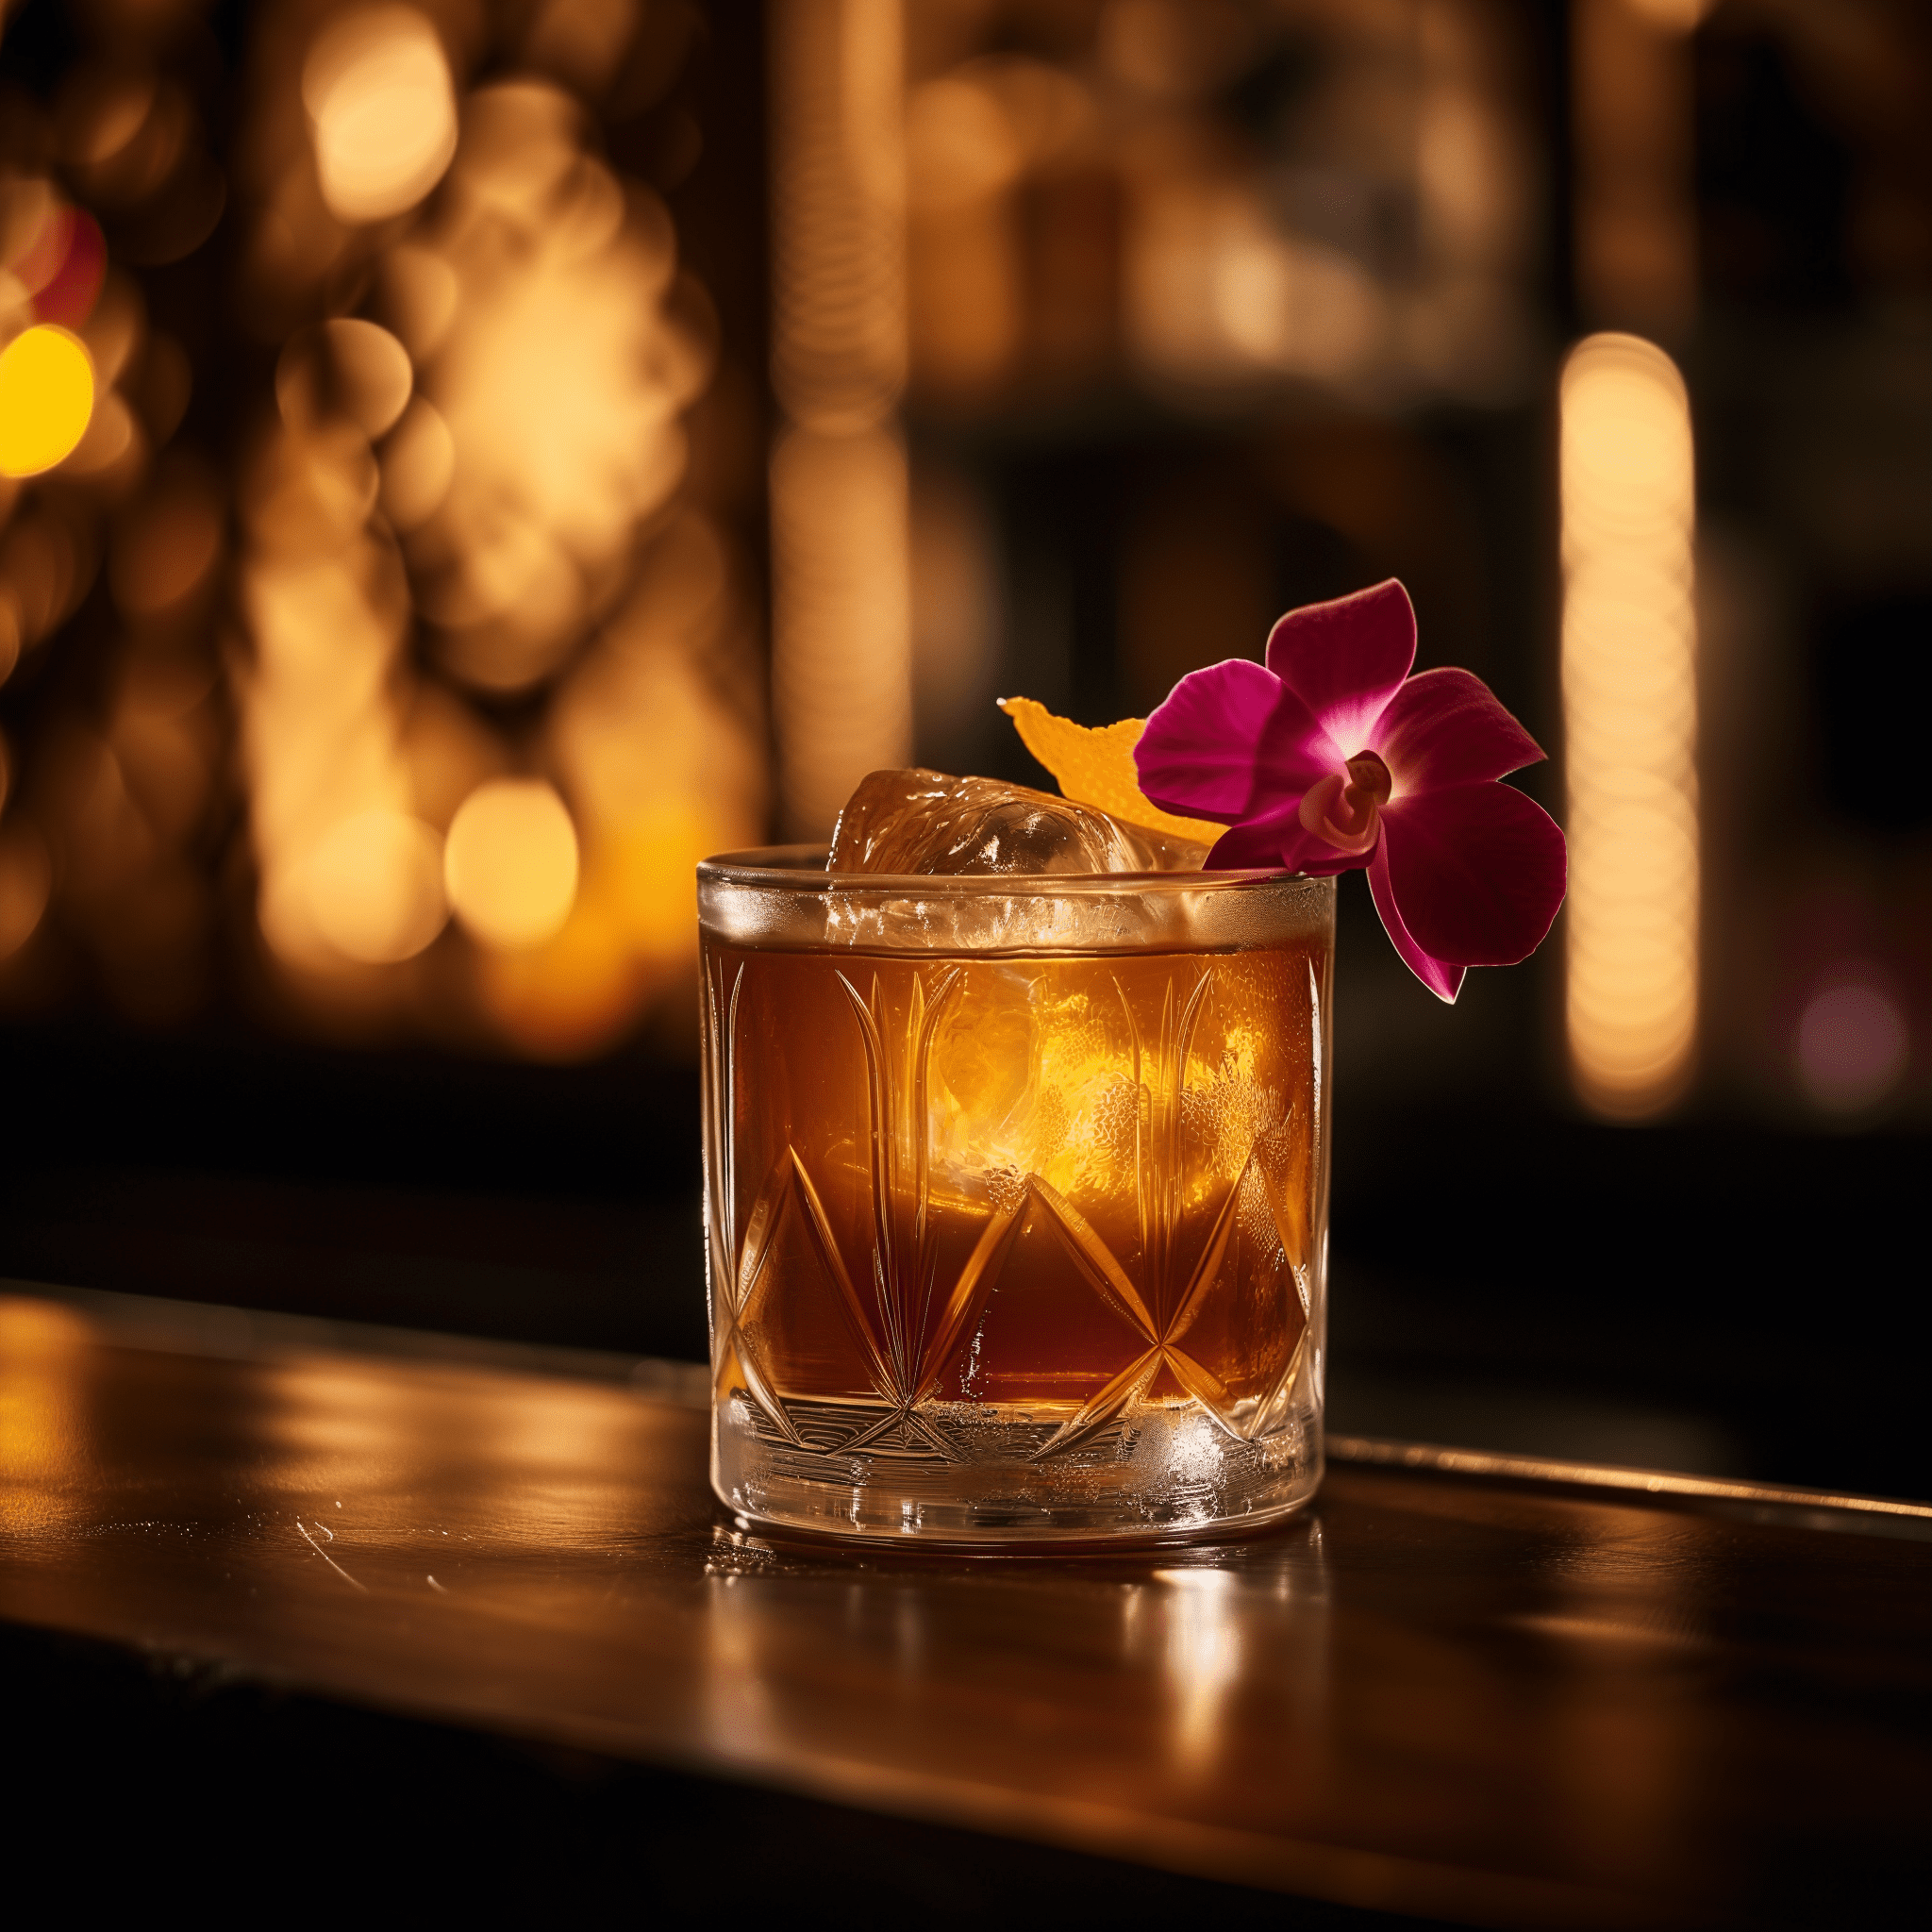 African Flower Cocktail Recipe - The African Flower is a harmonious blend of sweet and bitter, with the warmth of bourbon, the herbal notes of CioCiaro, and the rich chocolate undertone from Crème de Cacao. The orange bitters and twist add a zesty freshness that balances the cocktail, making it complex yet approachable.